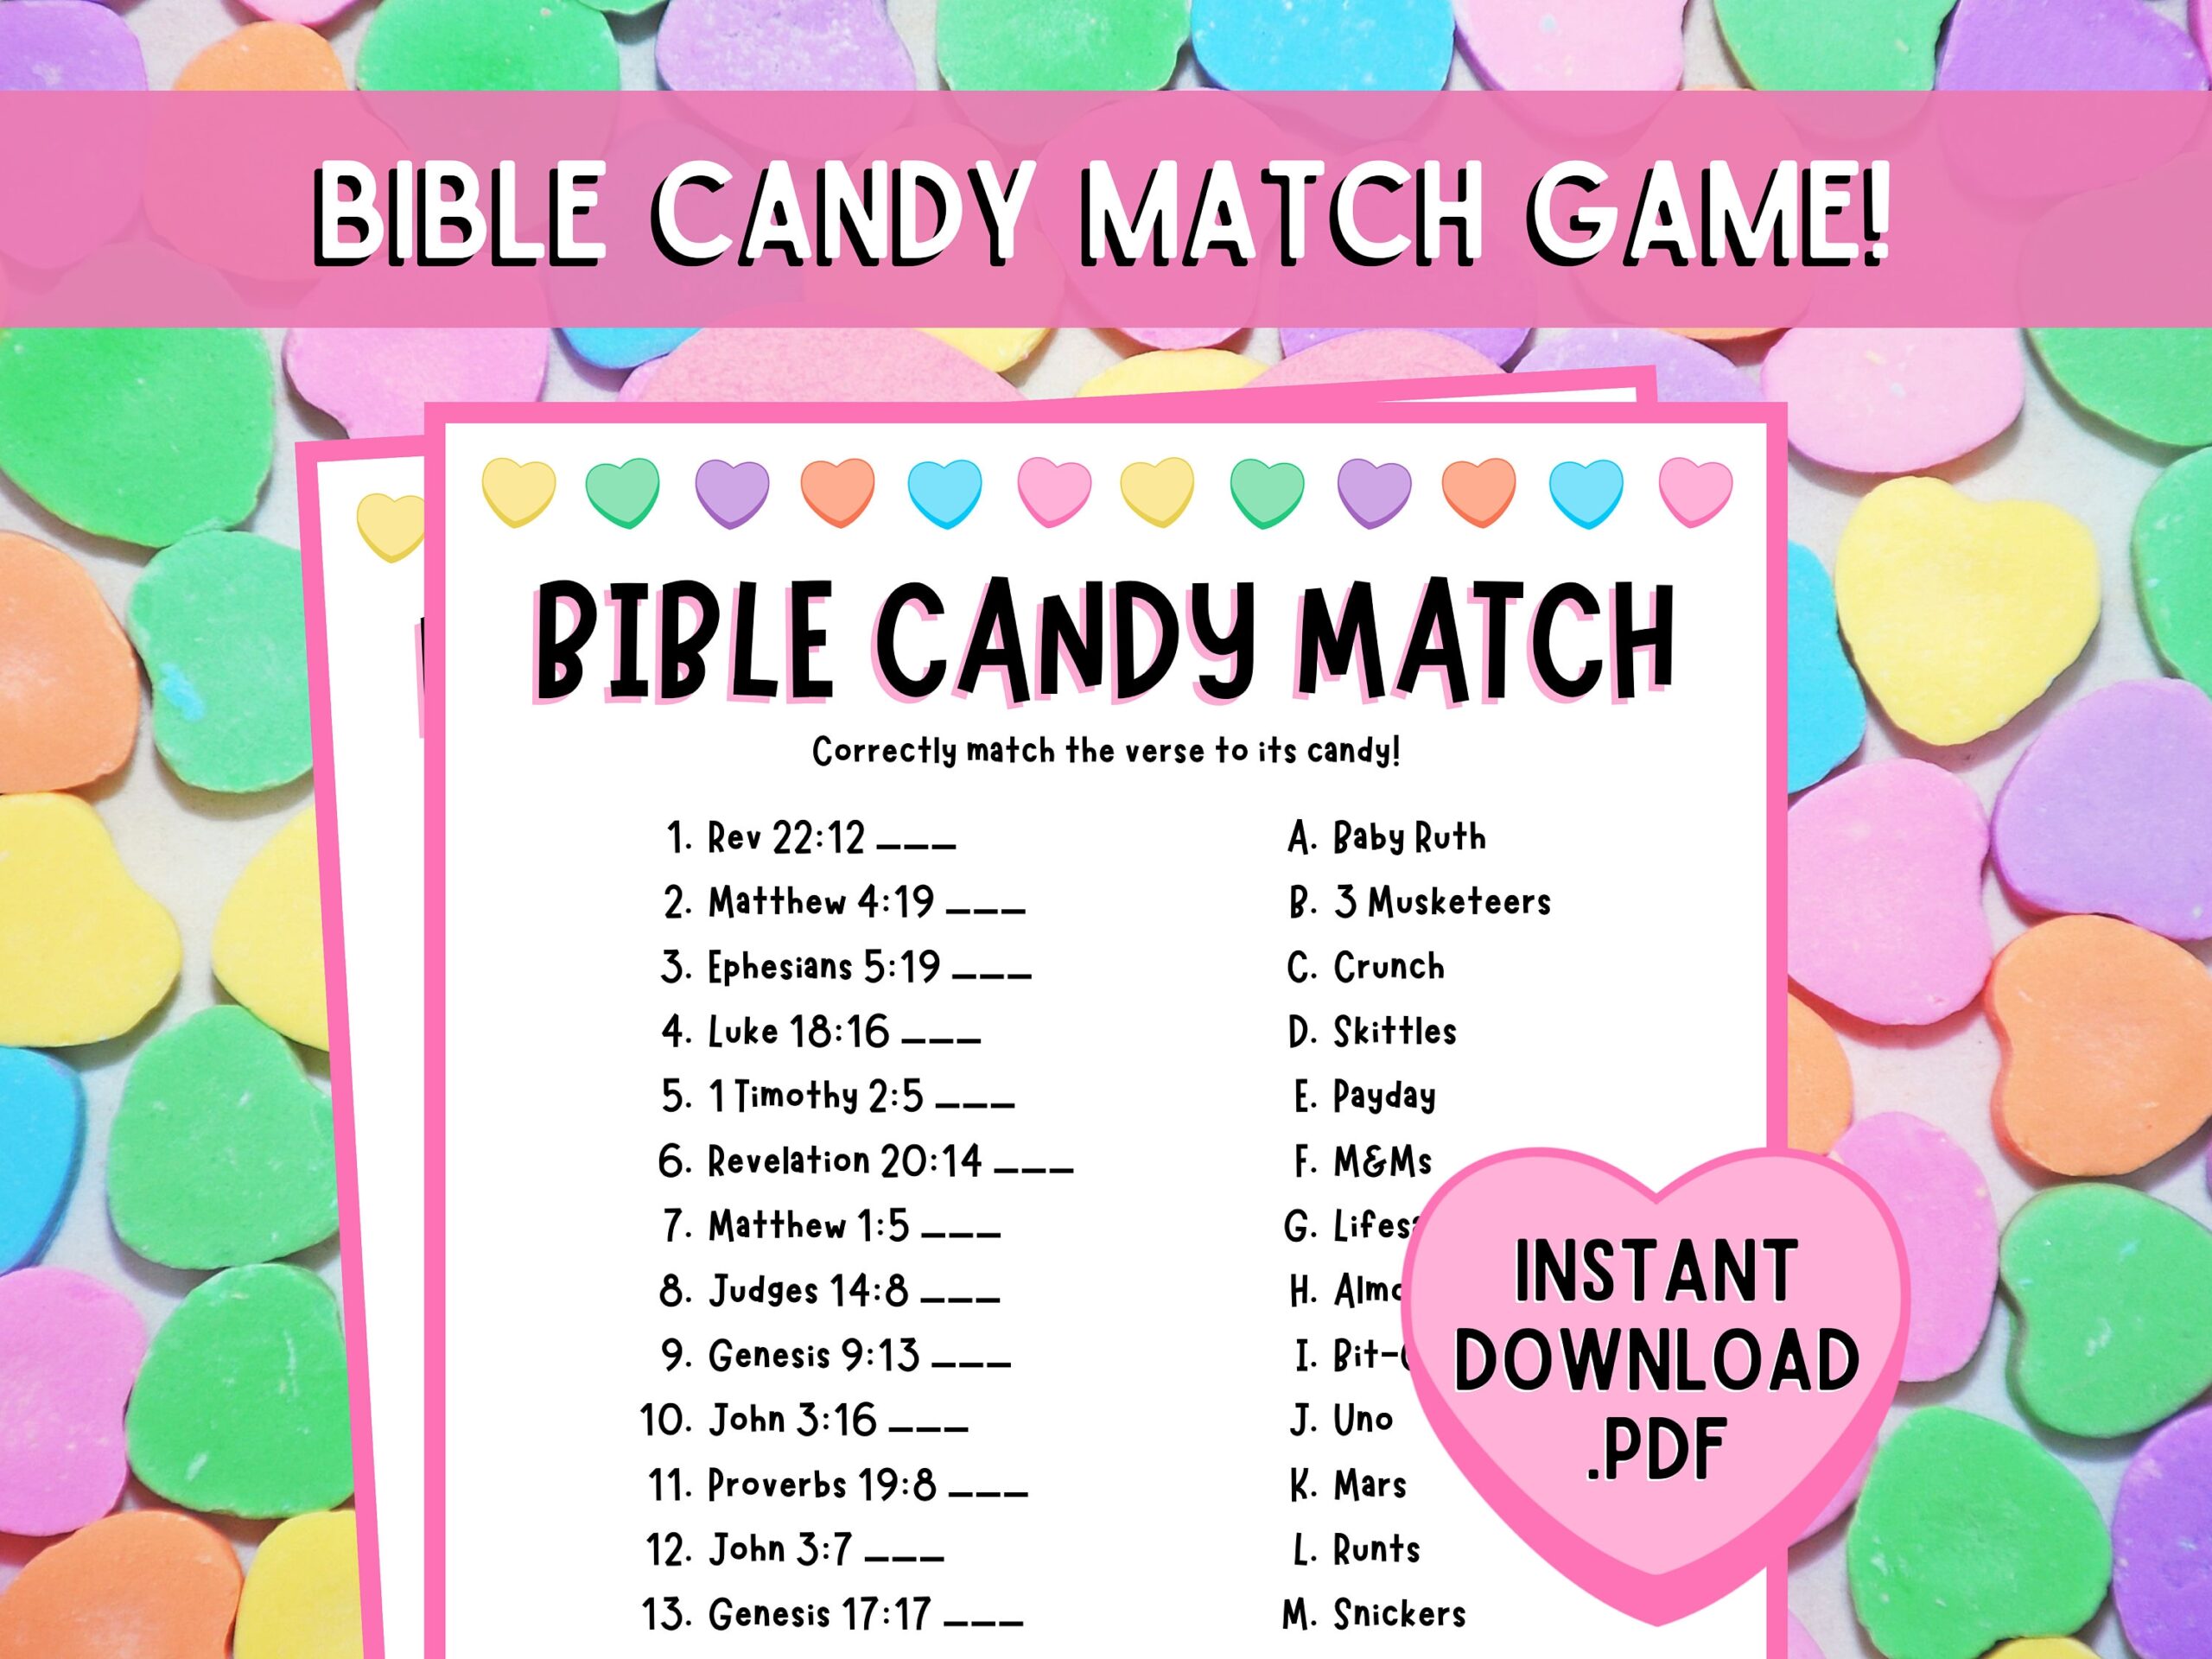 Bible Candy Match Game Bible Match Party Game Valentine Bible Games For Kids Adults Fun Church Valentine Party Games Church Games Etsy